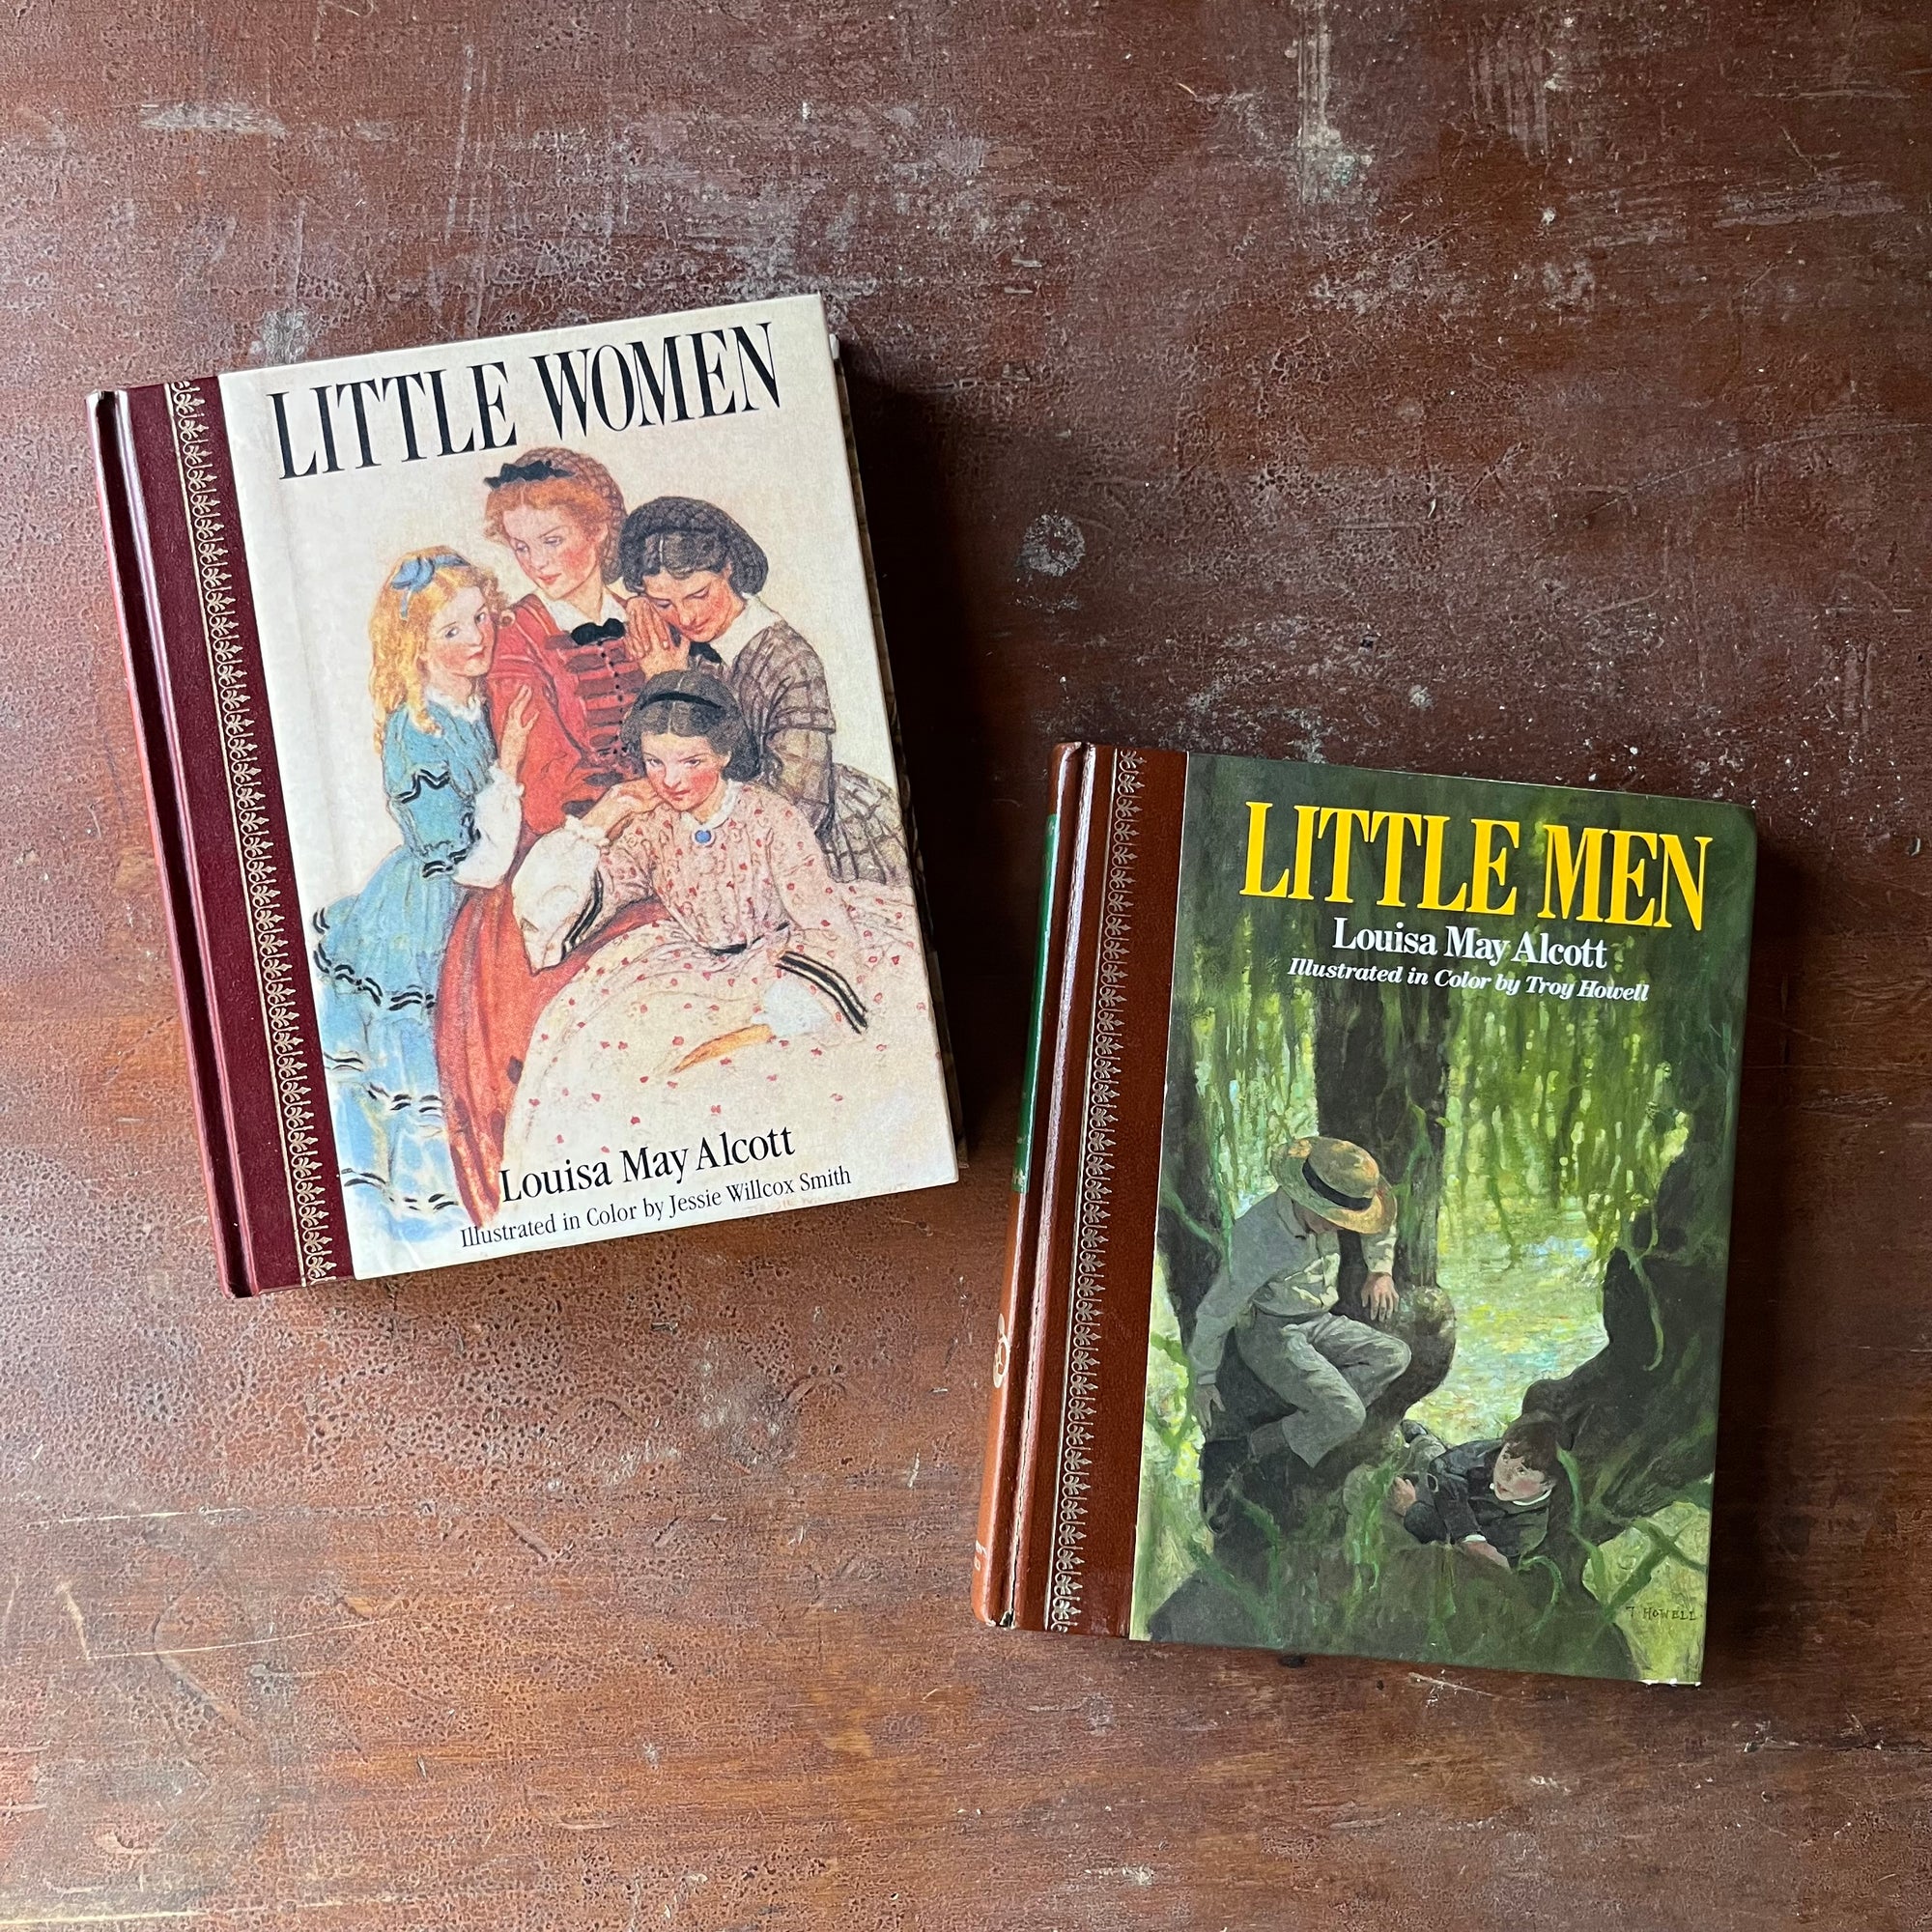 Children's Classics Book Set-Little Women with illustrations by Jessie Wilcox Smith & Little Men with illustrations by Troy Howell, both written by Louisa May Alcott-classic American Literature-vintage chapter books-view of the front covers